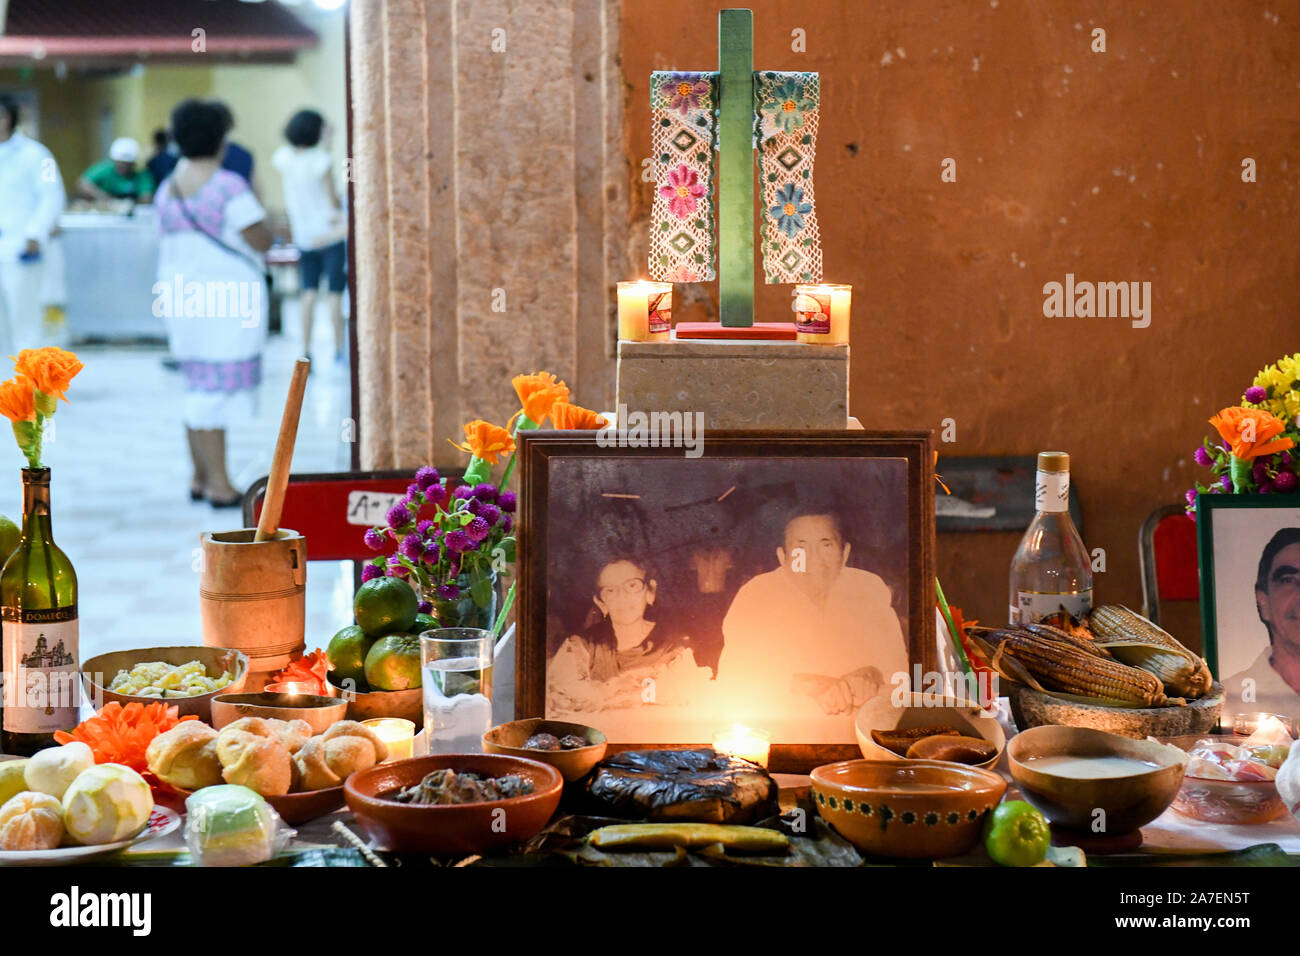 Family altar set up for  Hanal Pixan which is the celebration of the Day of the Dead that originated from Mayan culture. Merida, Yucatan, Mexico Stock Photo